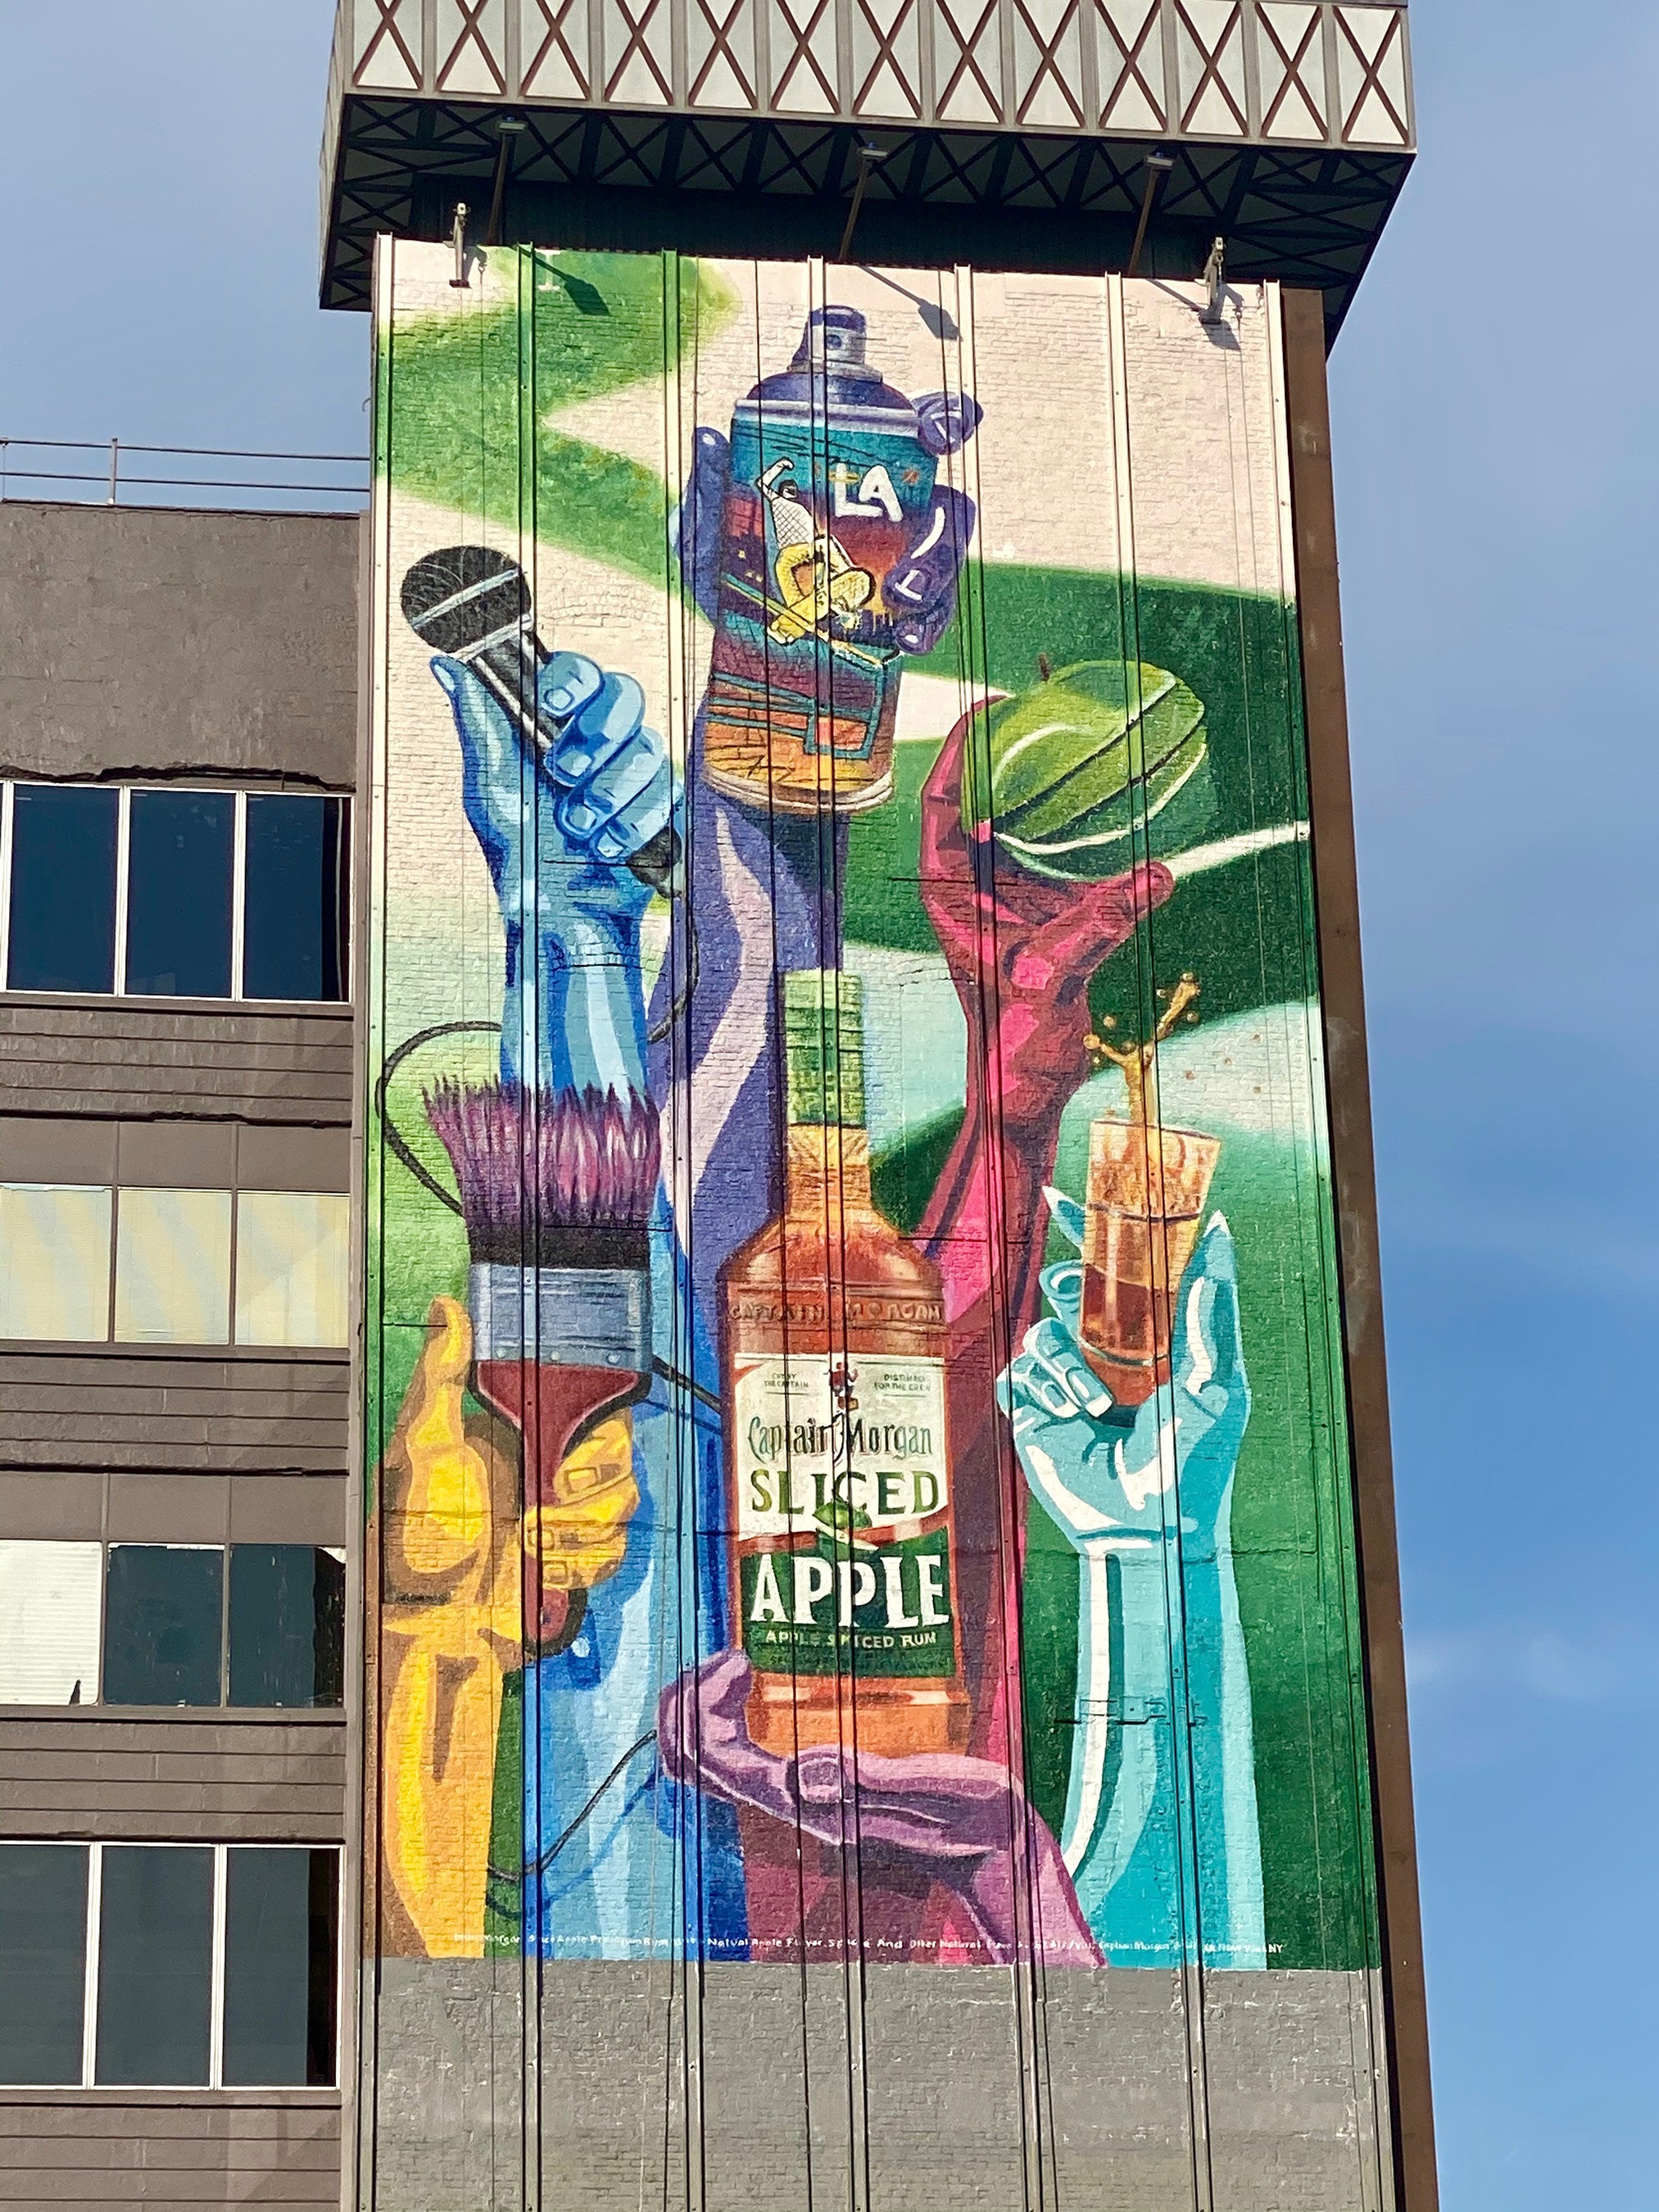 Captain Morgan Sliced Apple Celebrates The LA Community with New Mural by Local Artist MADSTEEZ